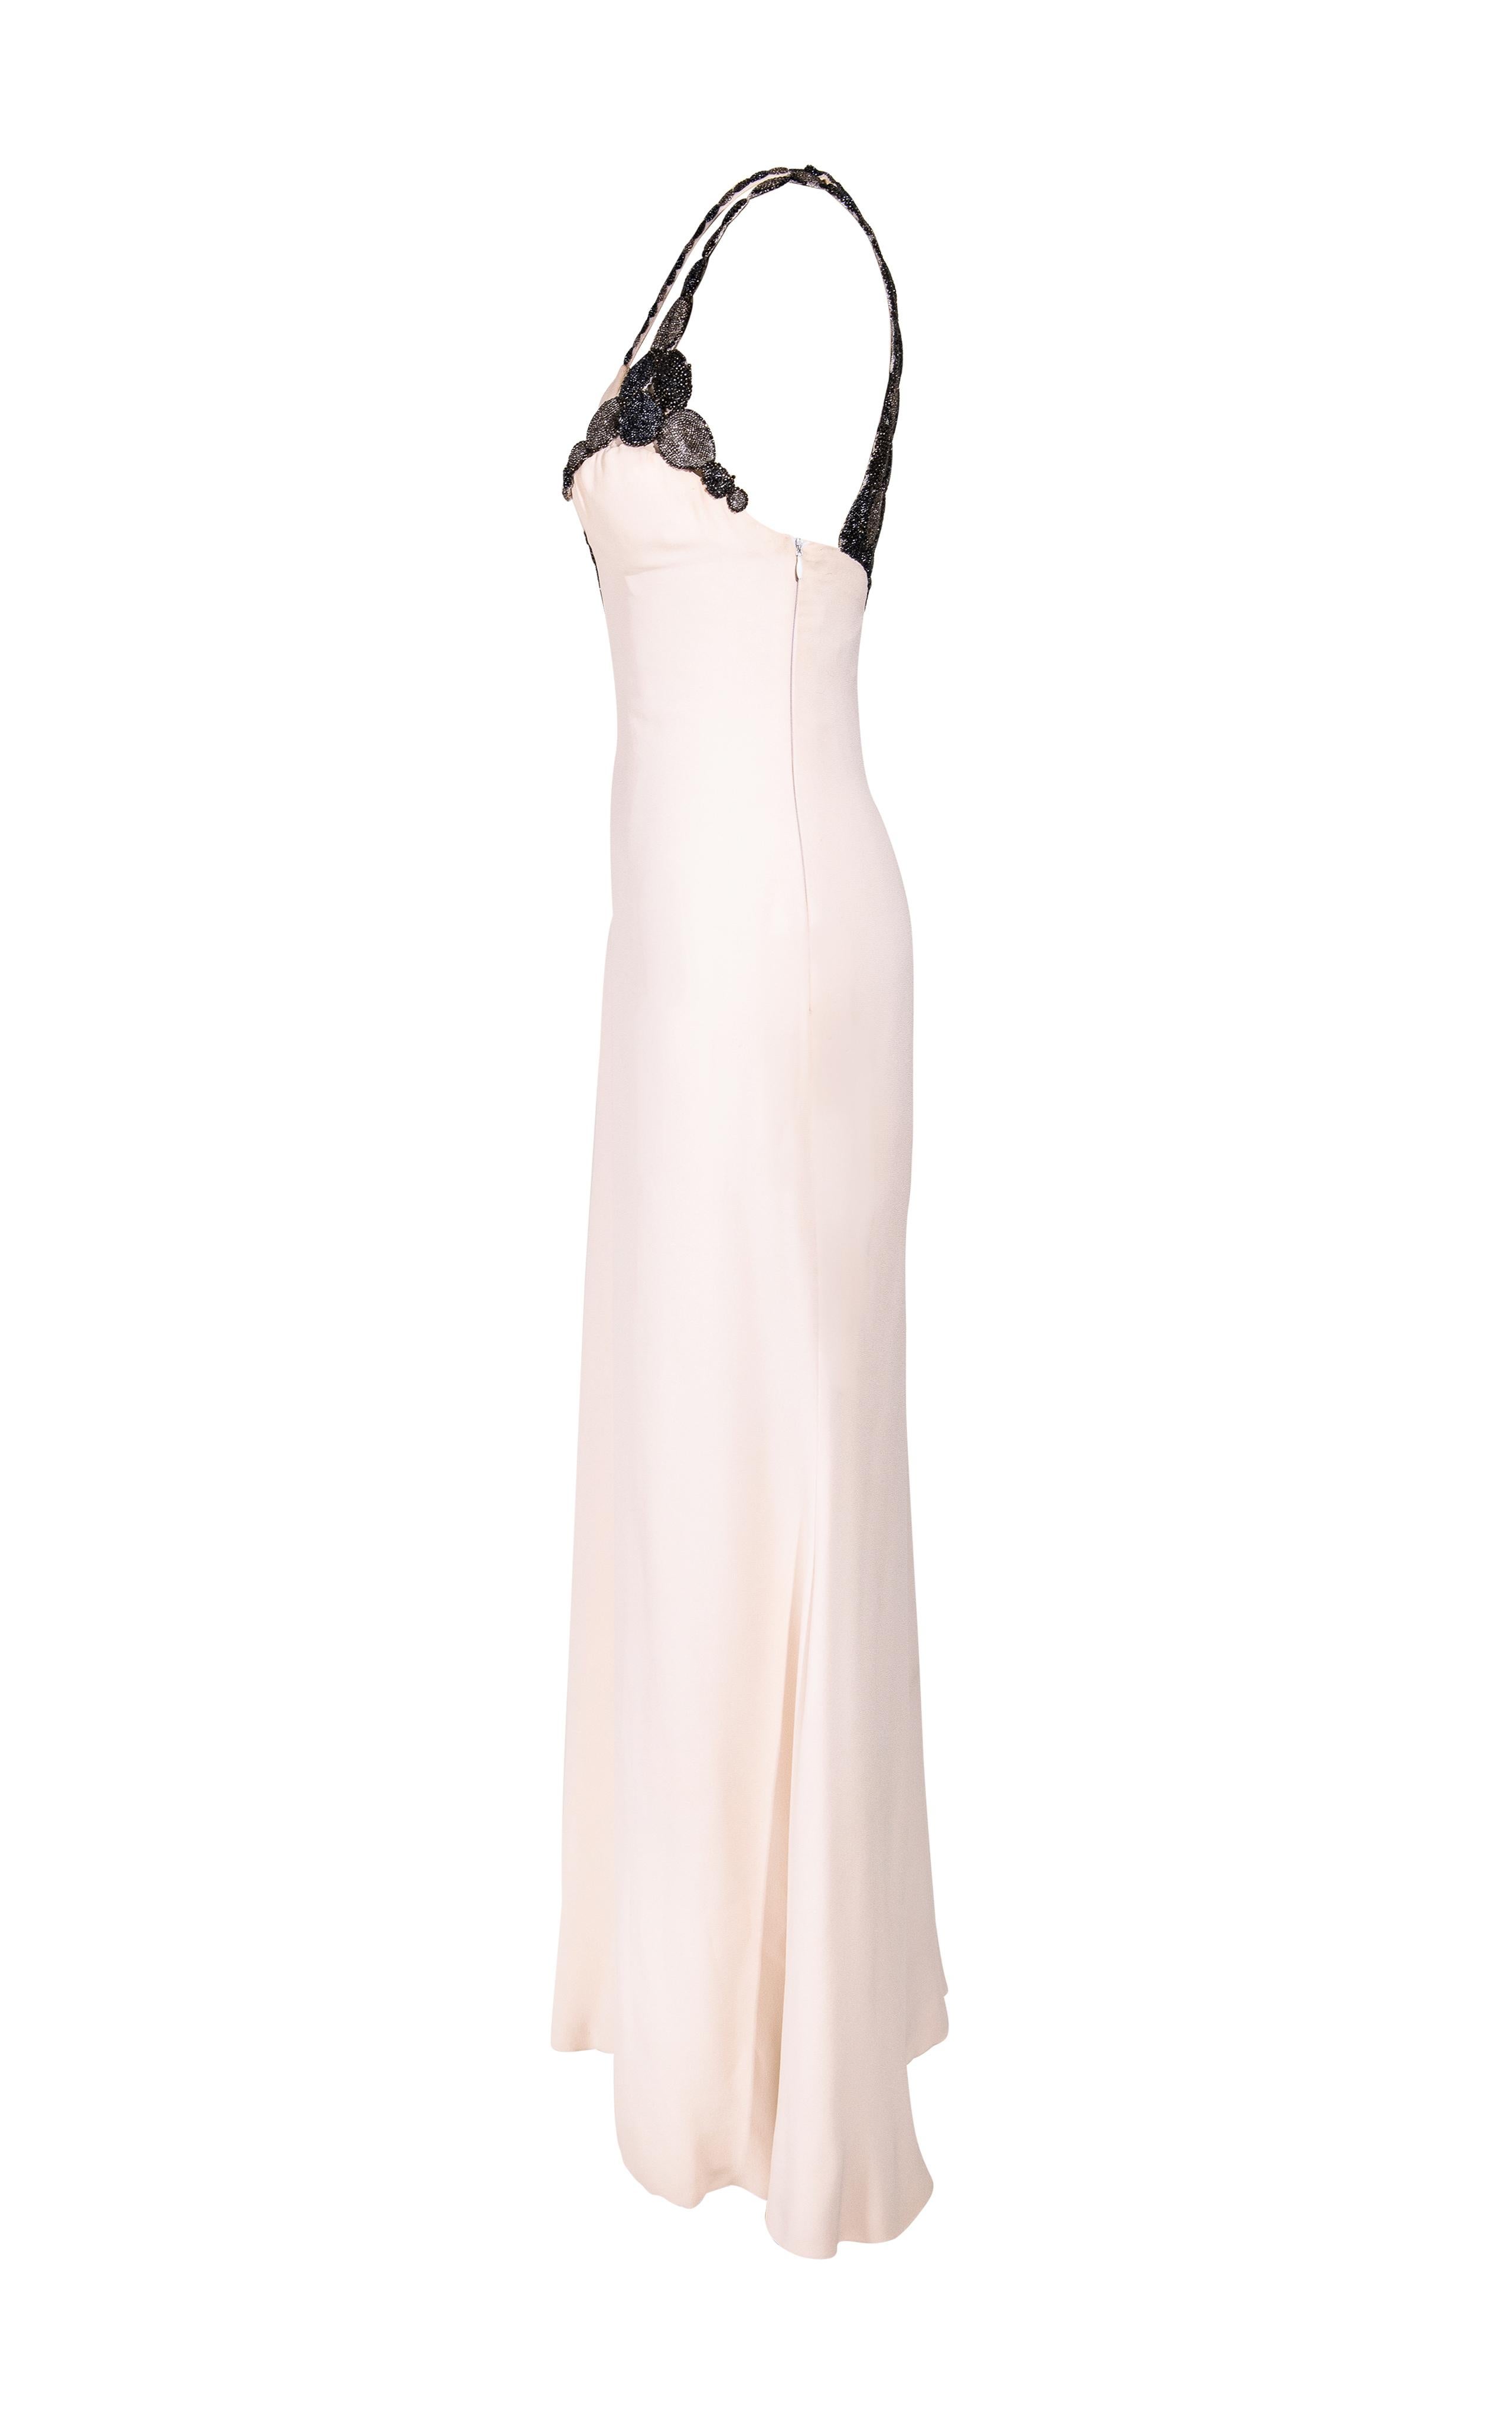 2000's Atelier Versace Haute Couture one-of-one silk embellished cream gown. Cream gown with gunmetal circular beaded design cutout straps and hidden side zip closure. Features built-in boning on right side to create a slight corset effect. Fabric